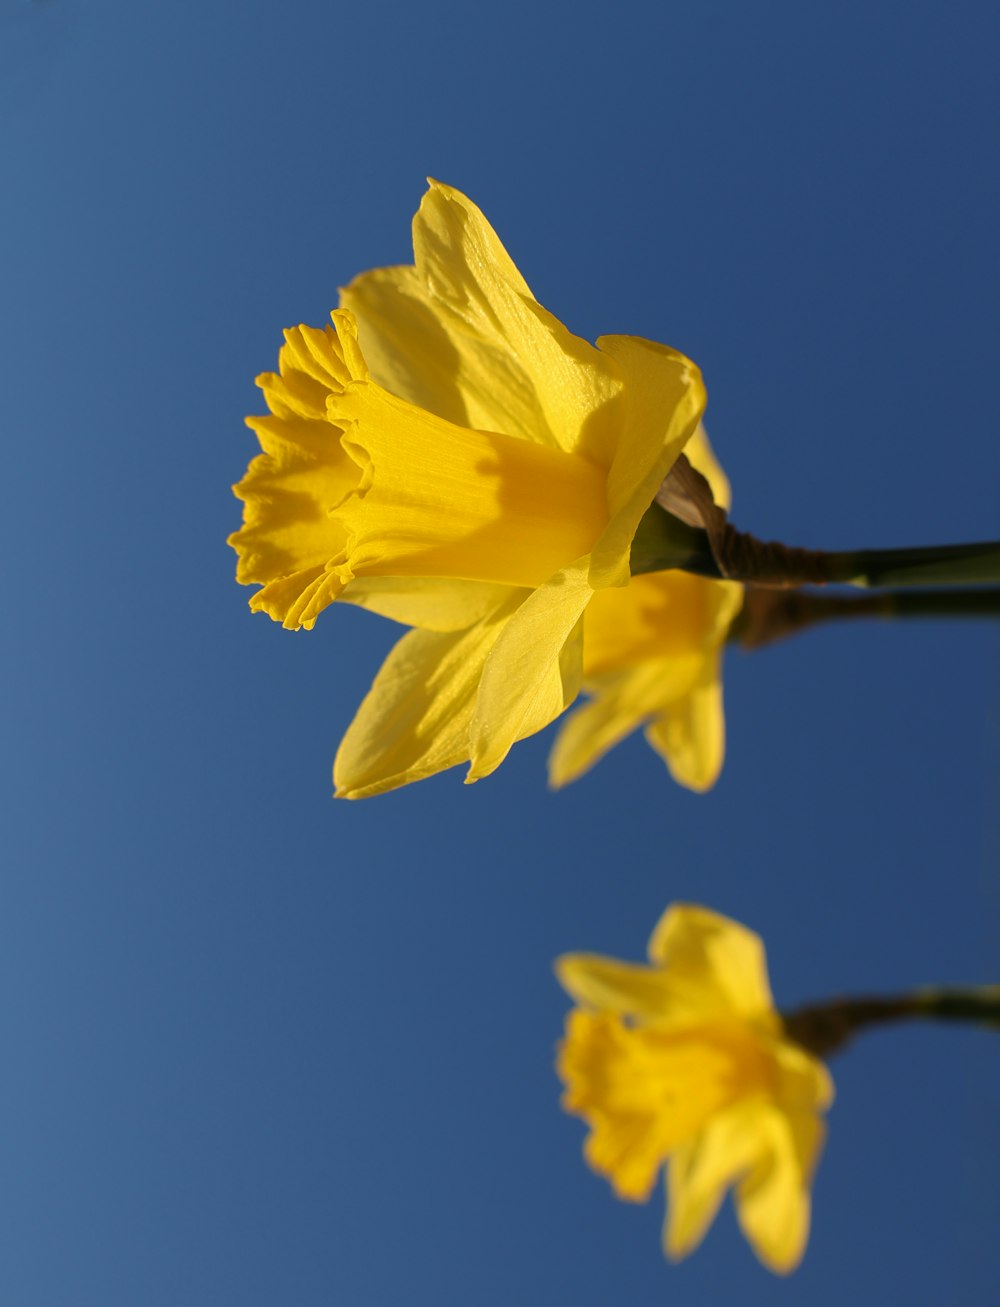 two yellow daffodils against a blue sky